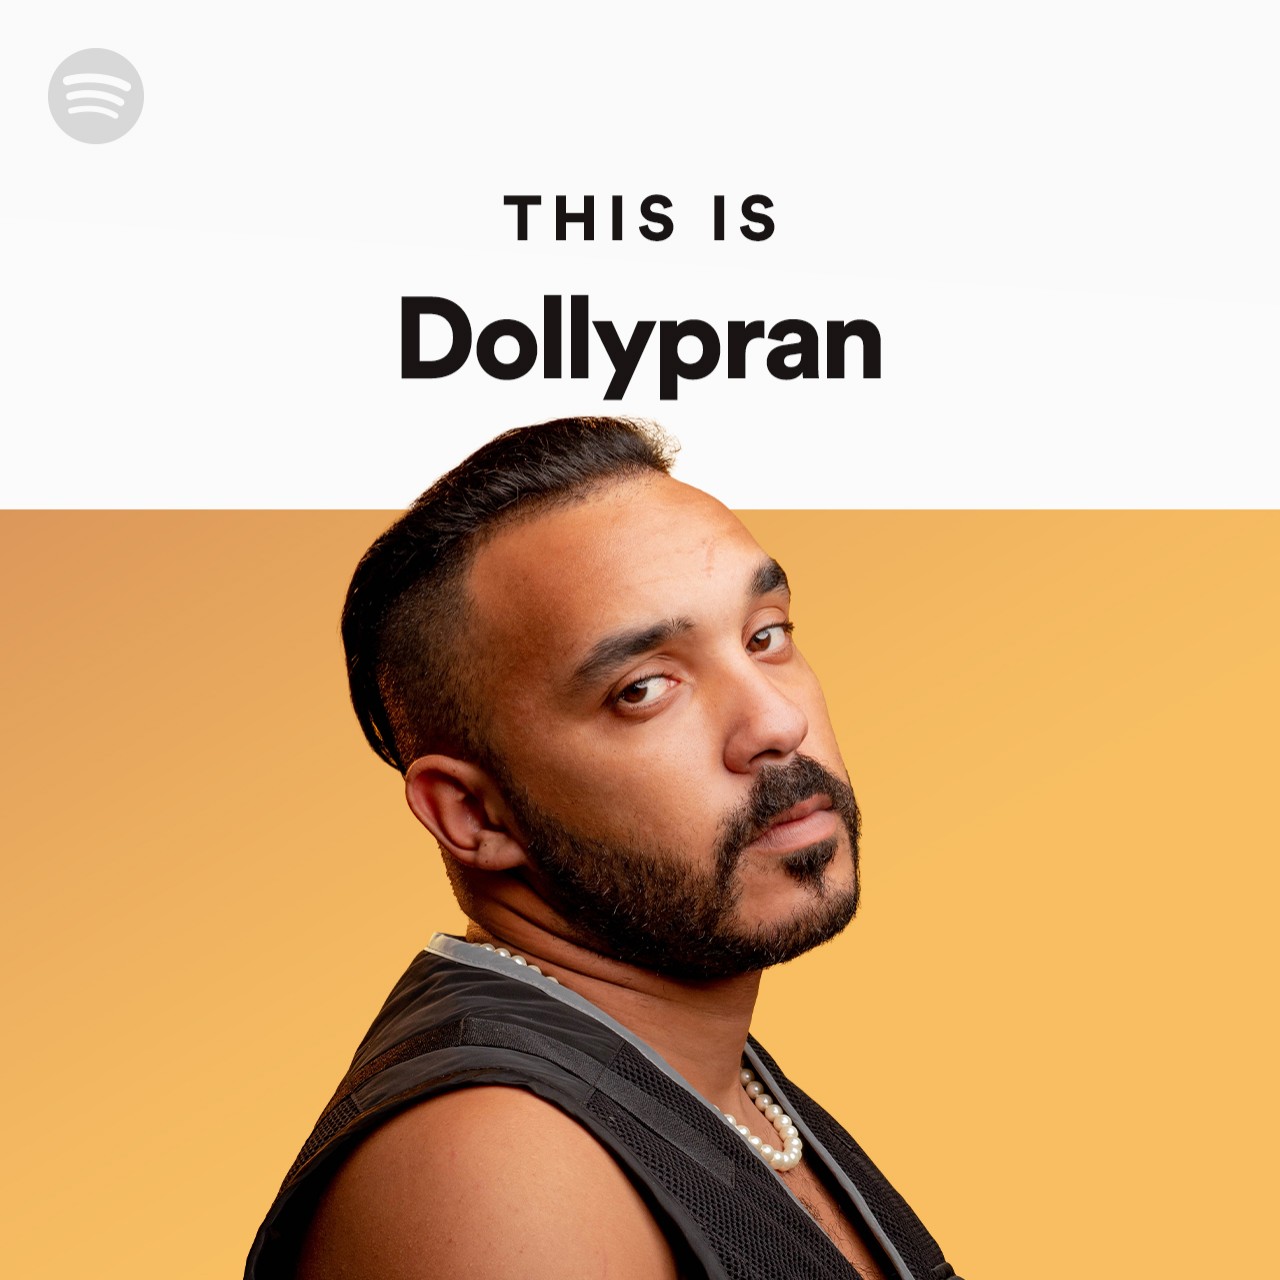 This Is Dollypran